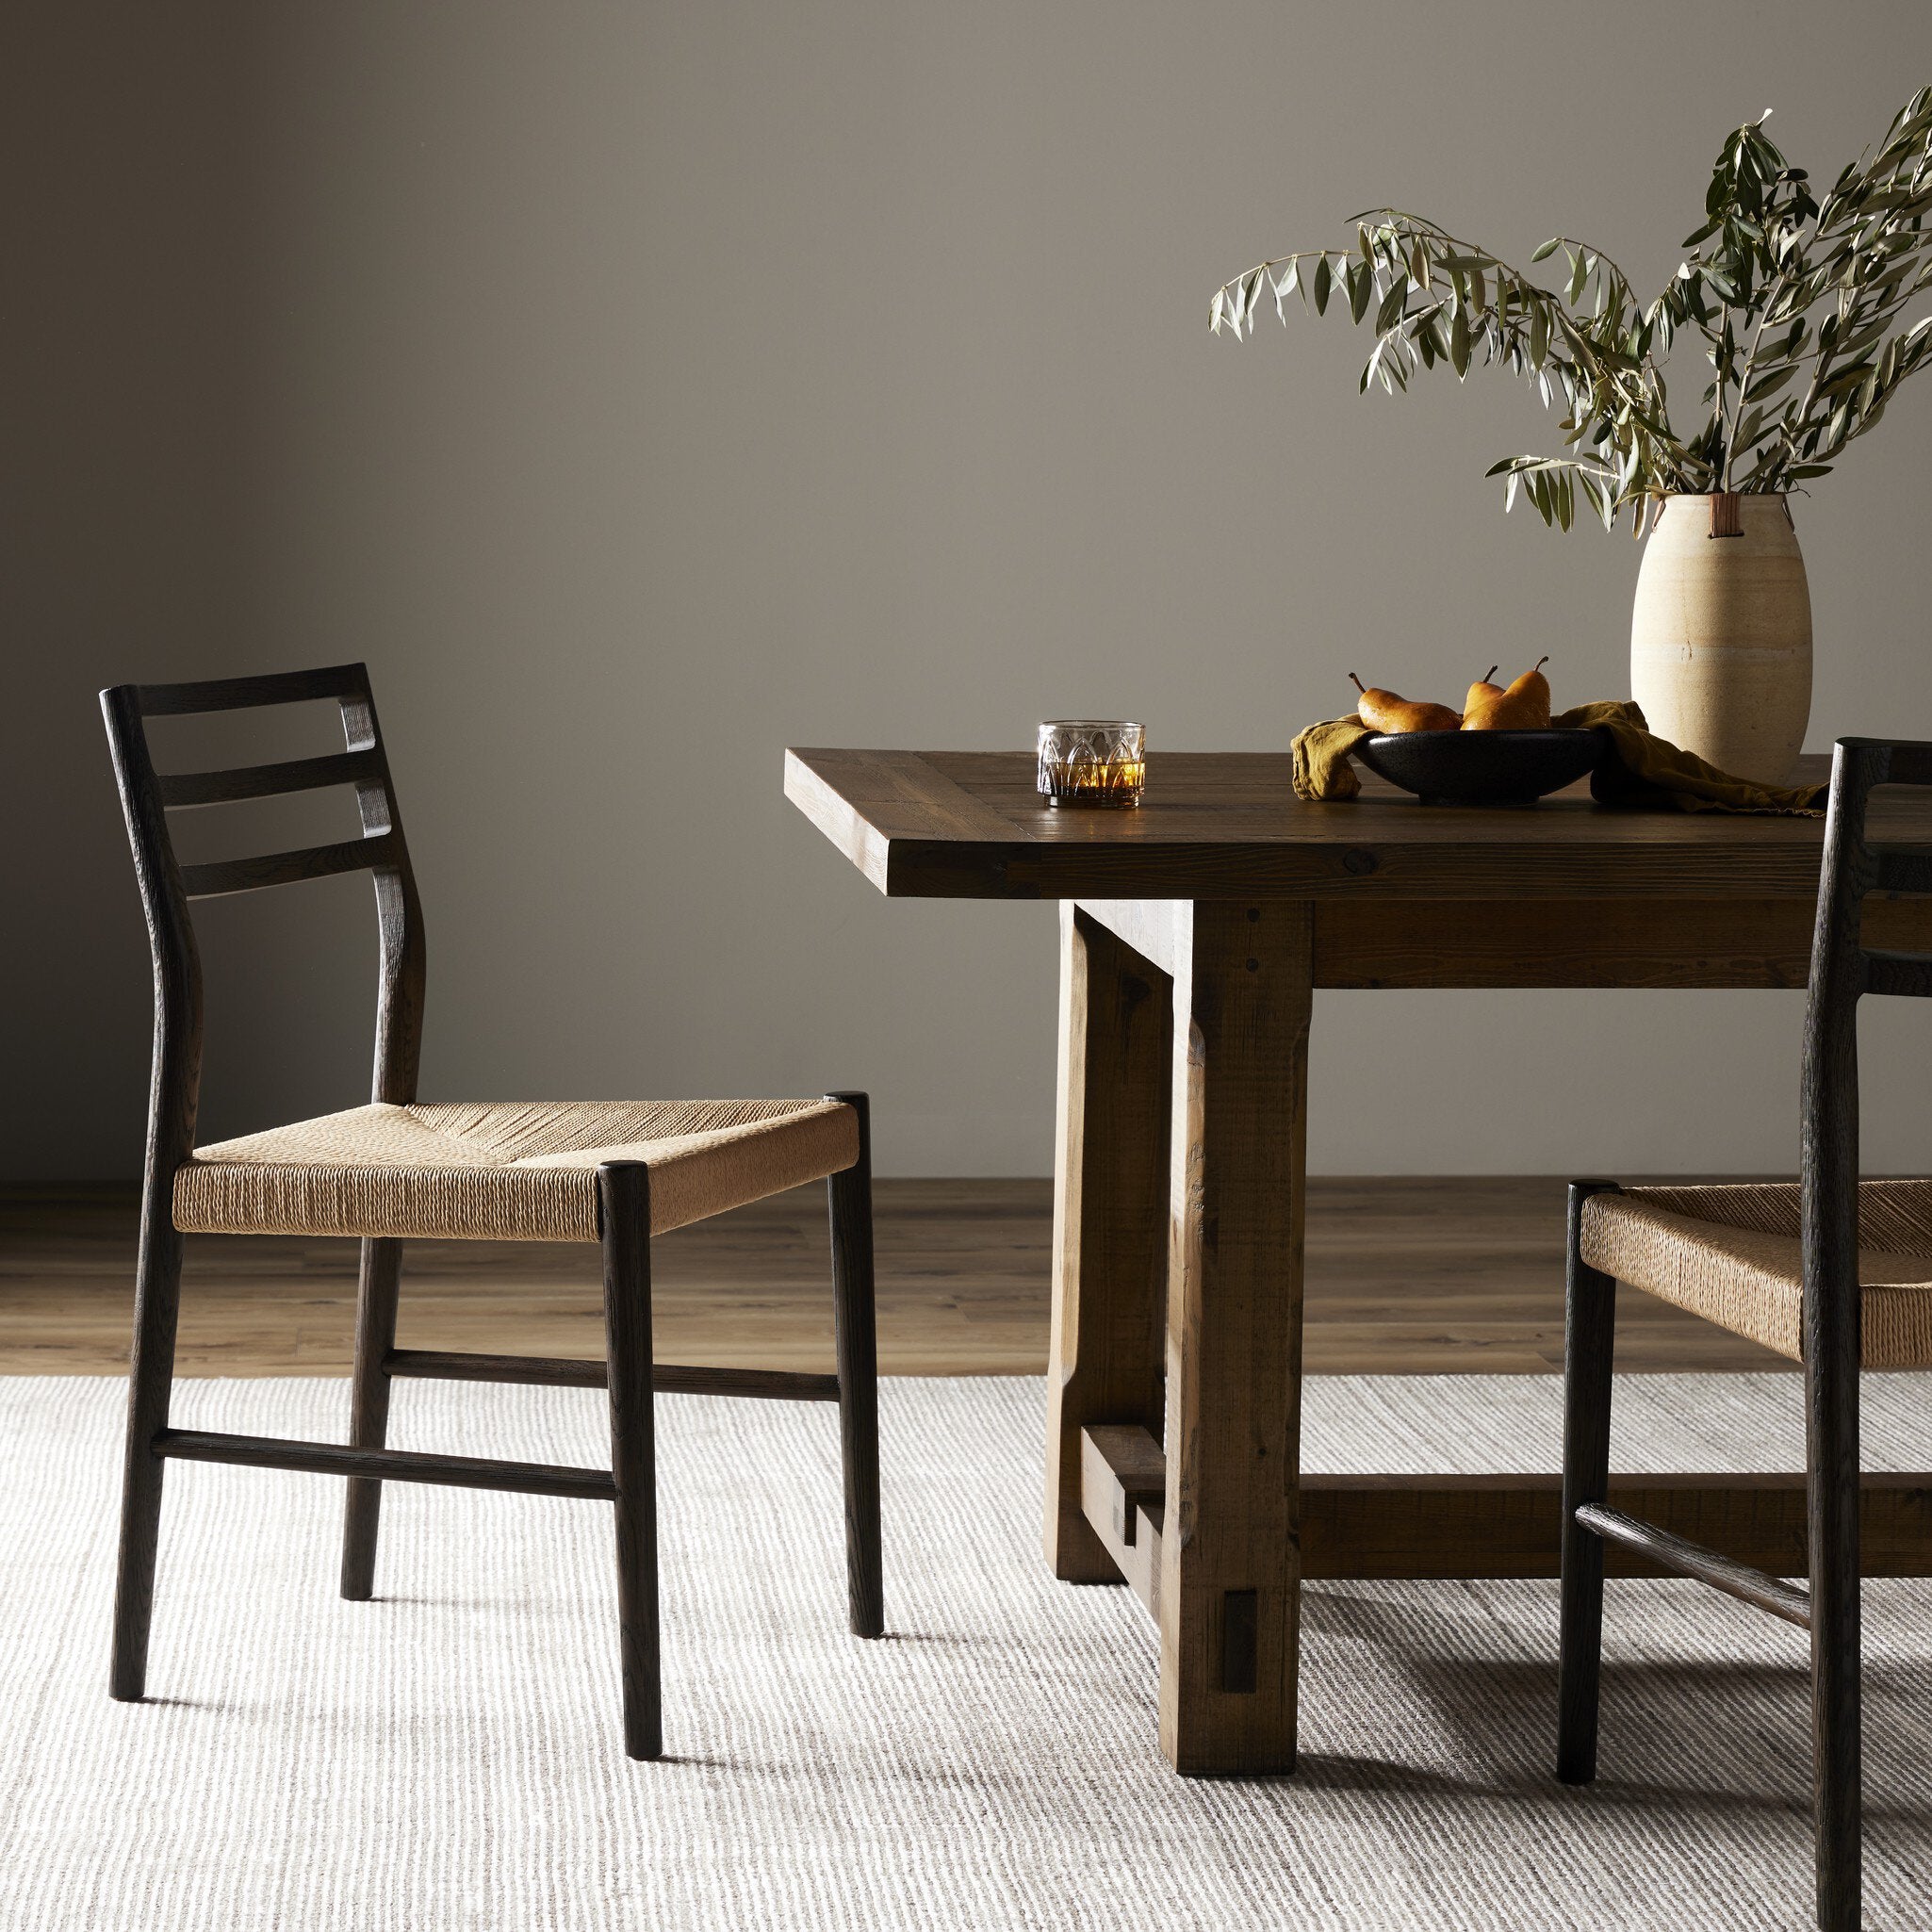 Glenmore Woven Dining Chair - Natural Papercord